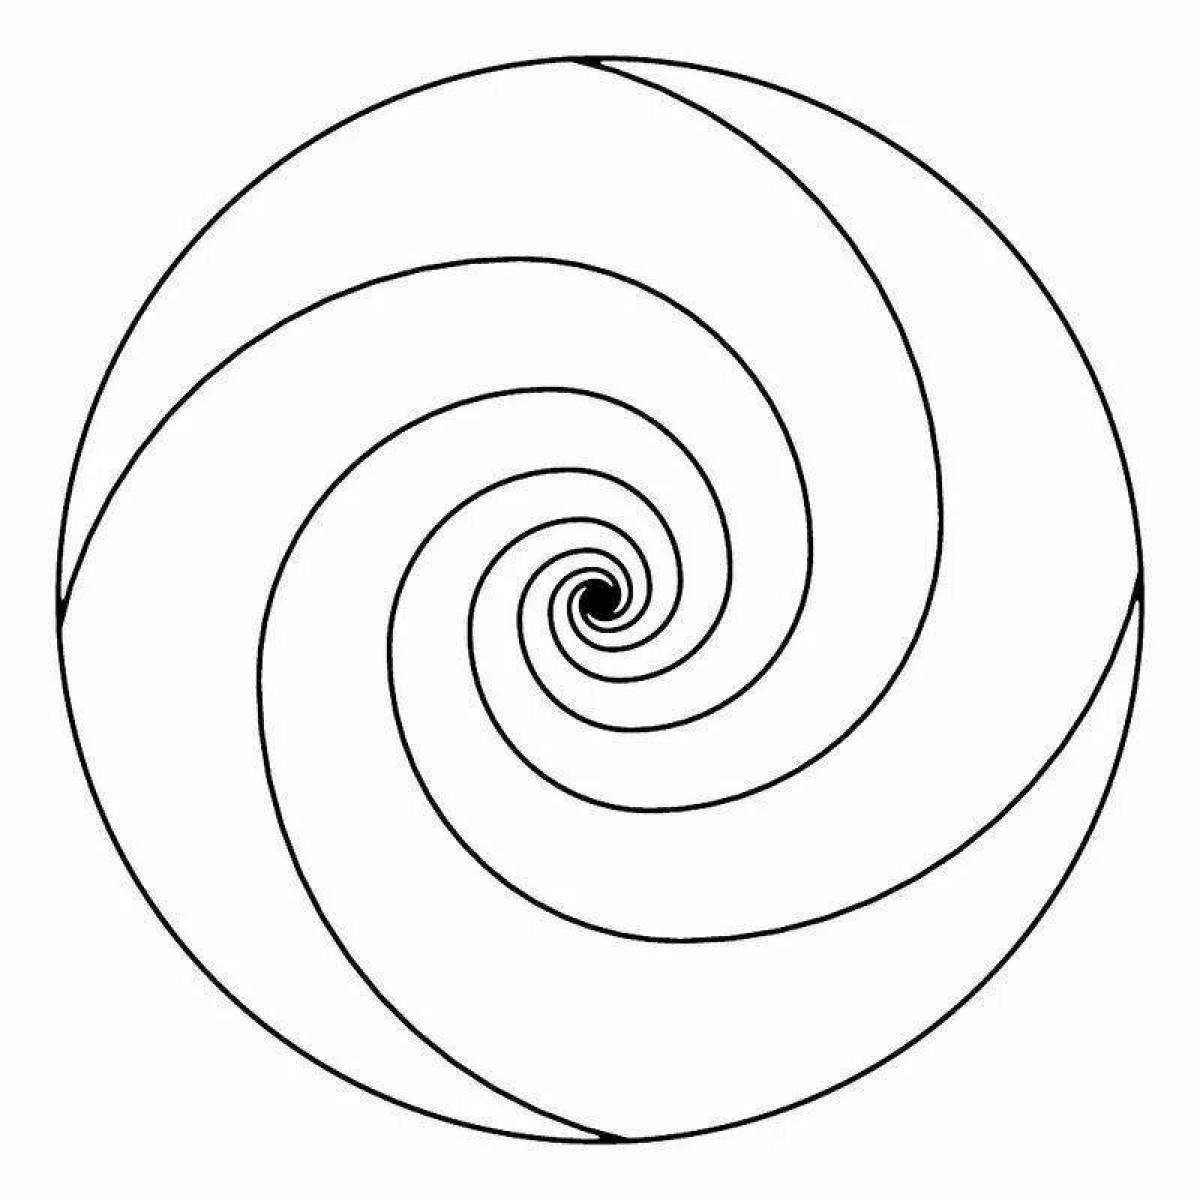 Artistic spiral coloring application